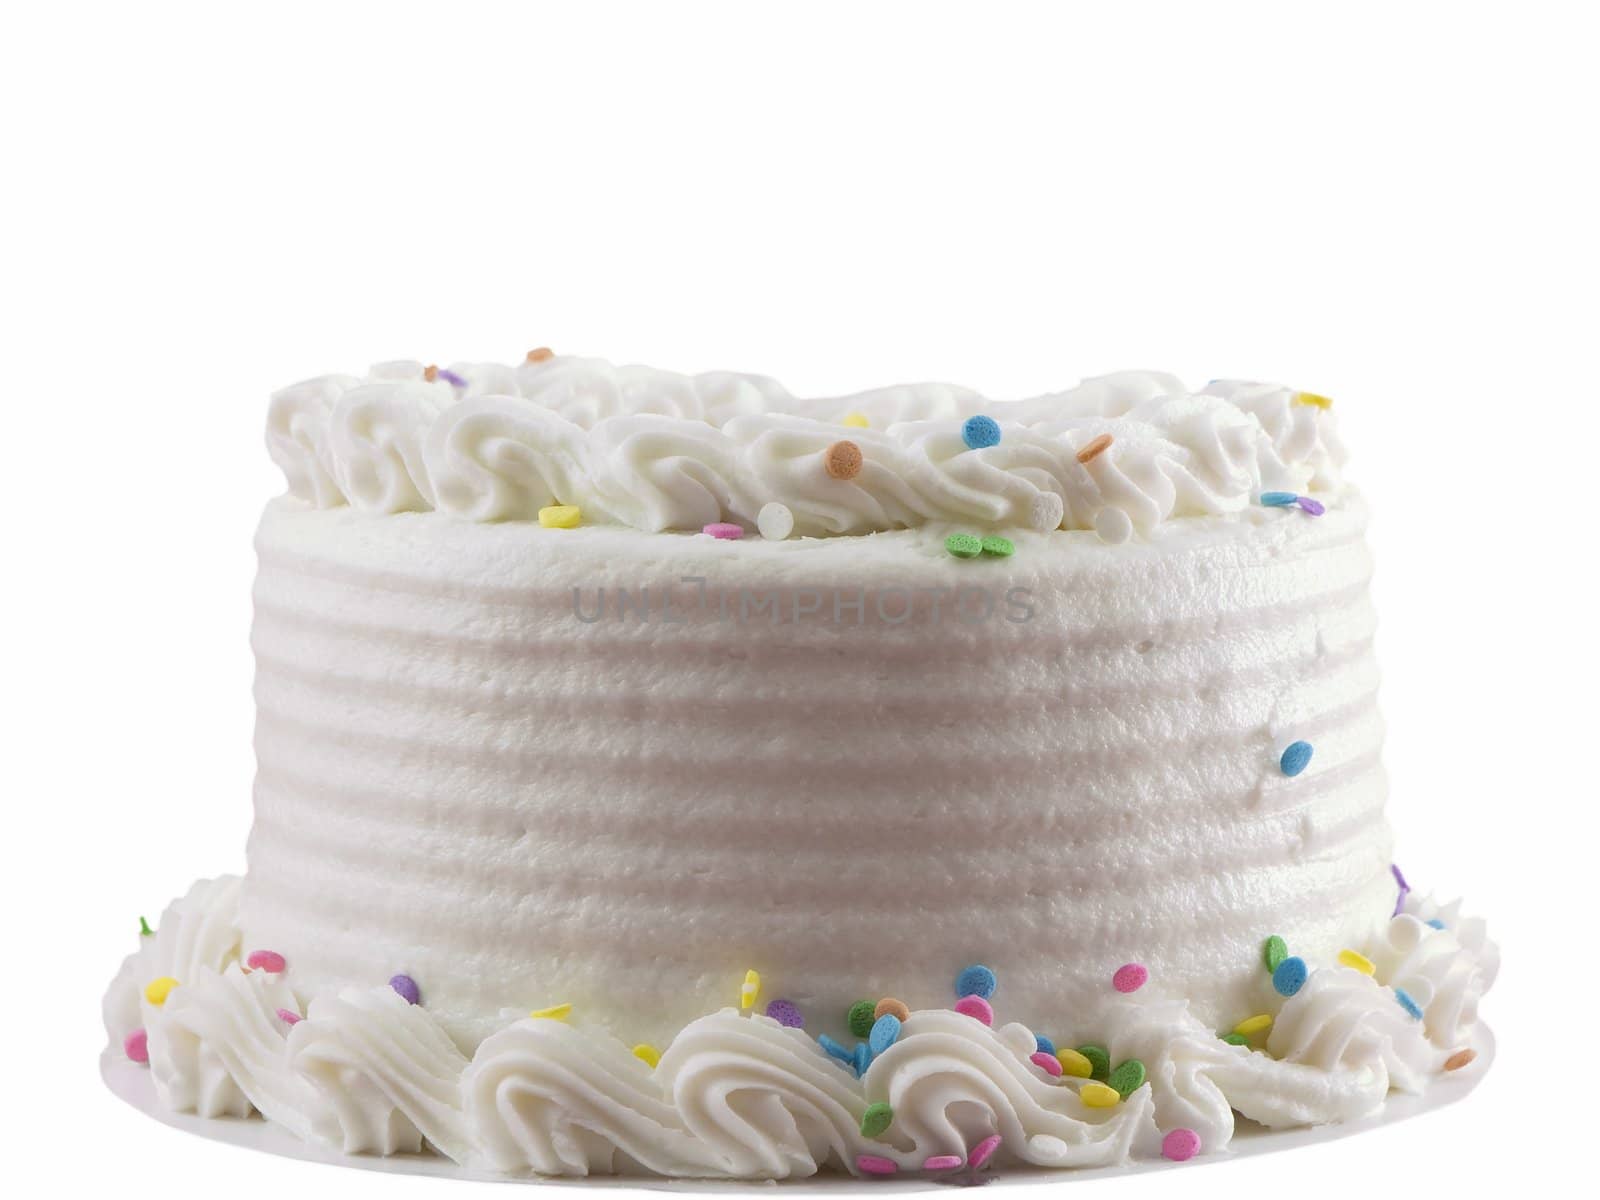 White frosted birthday cake isolated on white